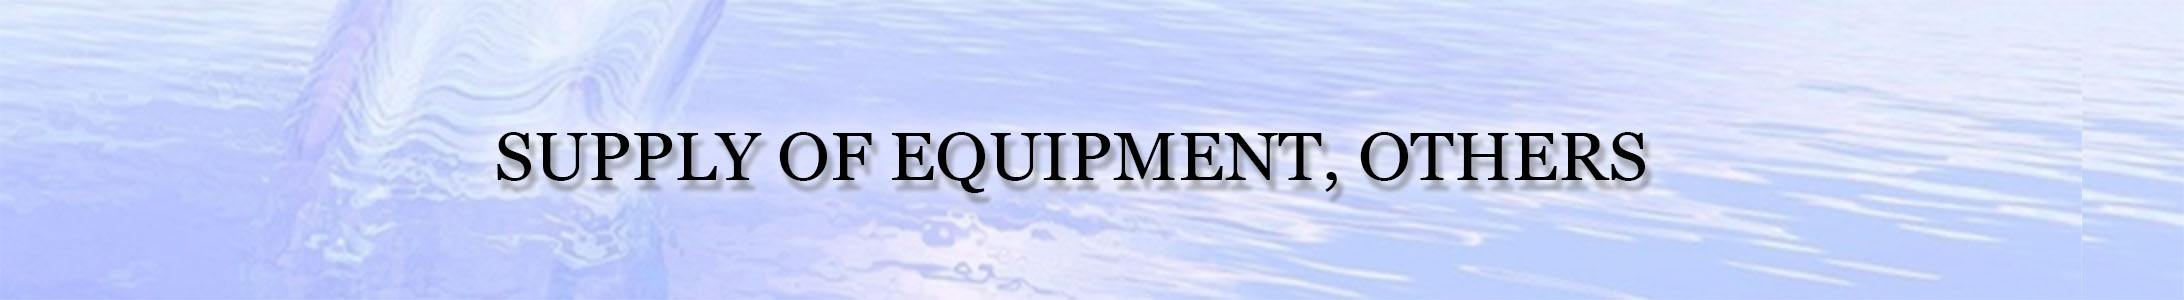 Supply of water, sewage, and wastewater treatment equipment